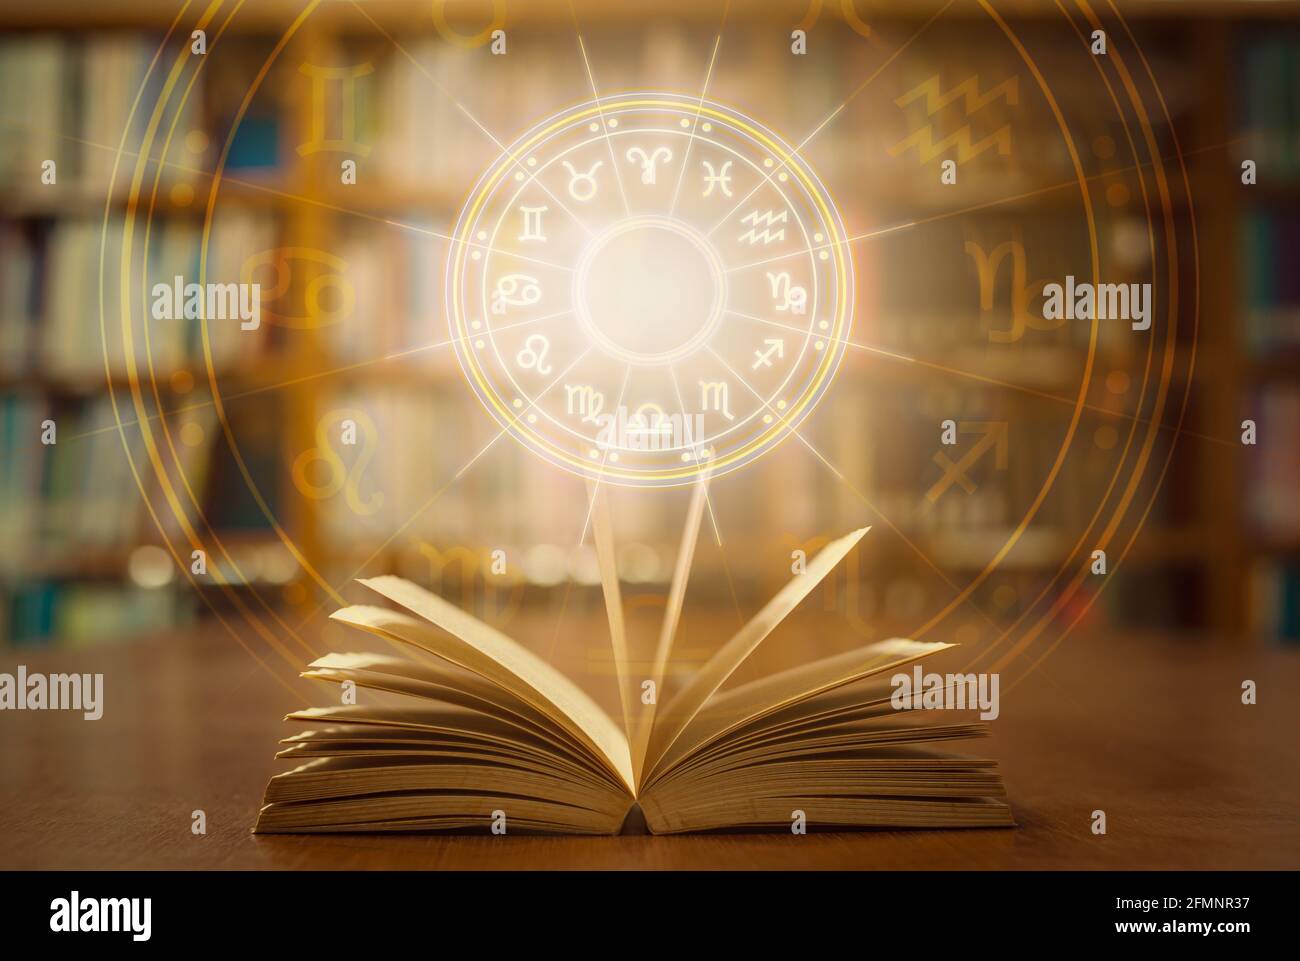 Horoscope astrology, Zodiac sign and constellation study for foretell and fortune telling education course concept with horoscopic wheel over old book Stock Photo